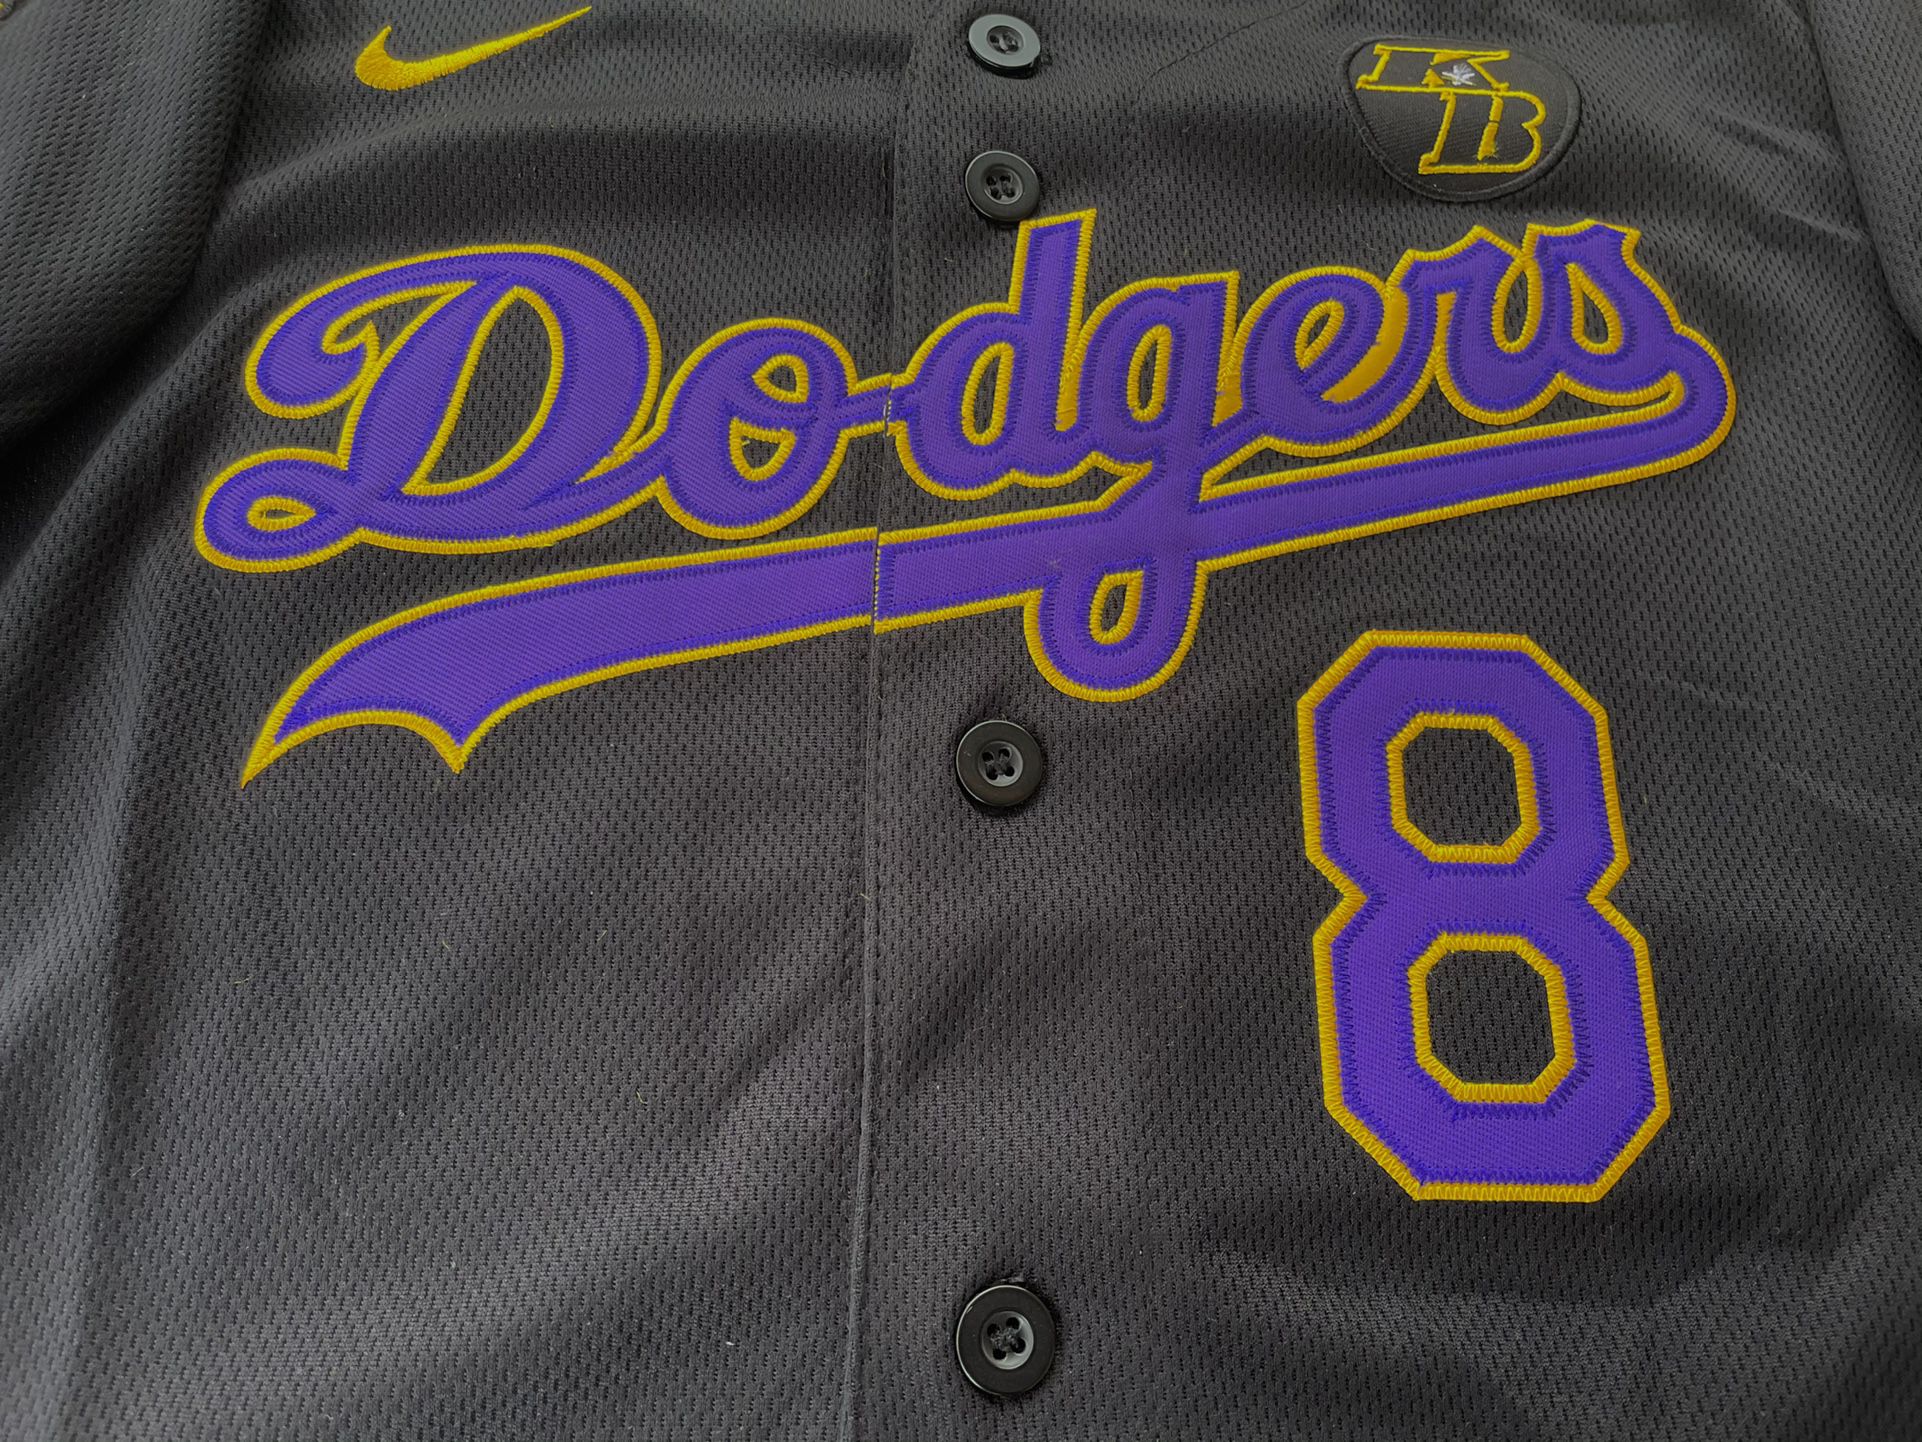 Kobe Bryant Los Angeles Dodgers Jersey x Kobe Bryant #8 #24 Black // Blue  // NWT for Sale in Los Angeles, CA - OfferUp